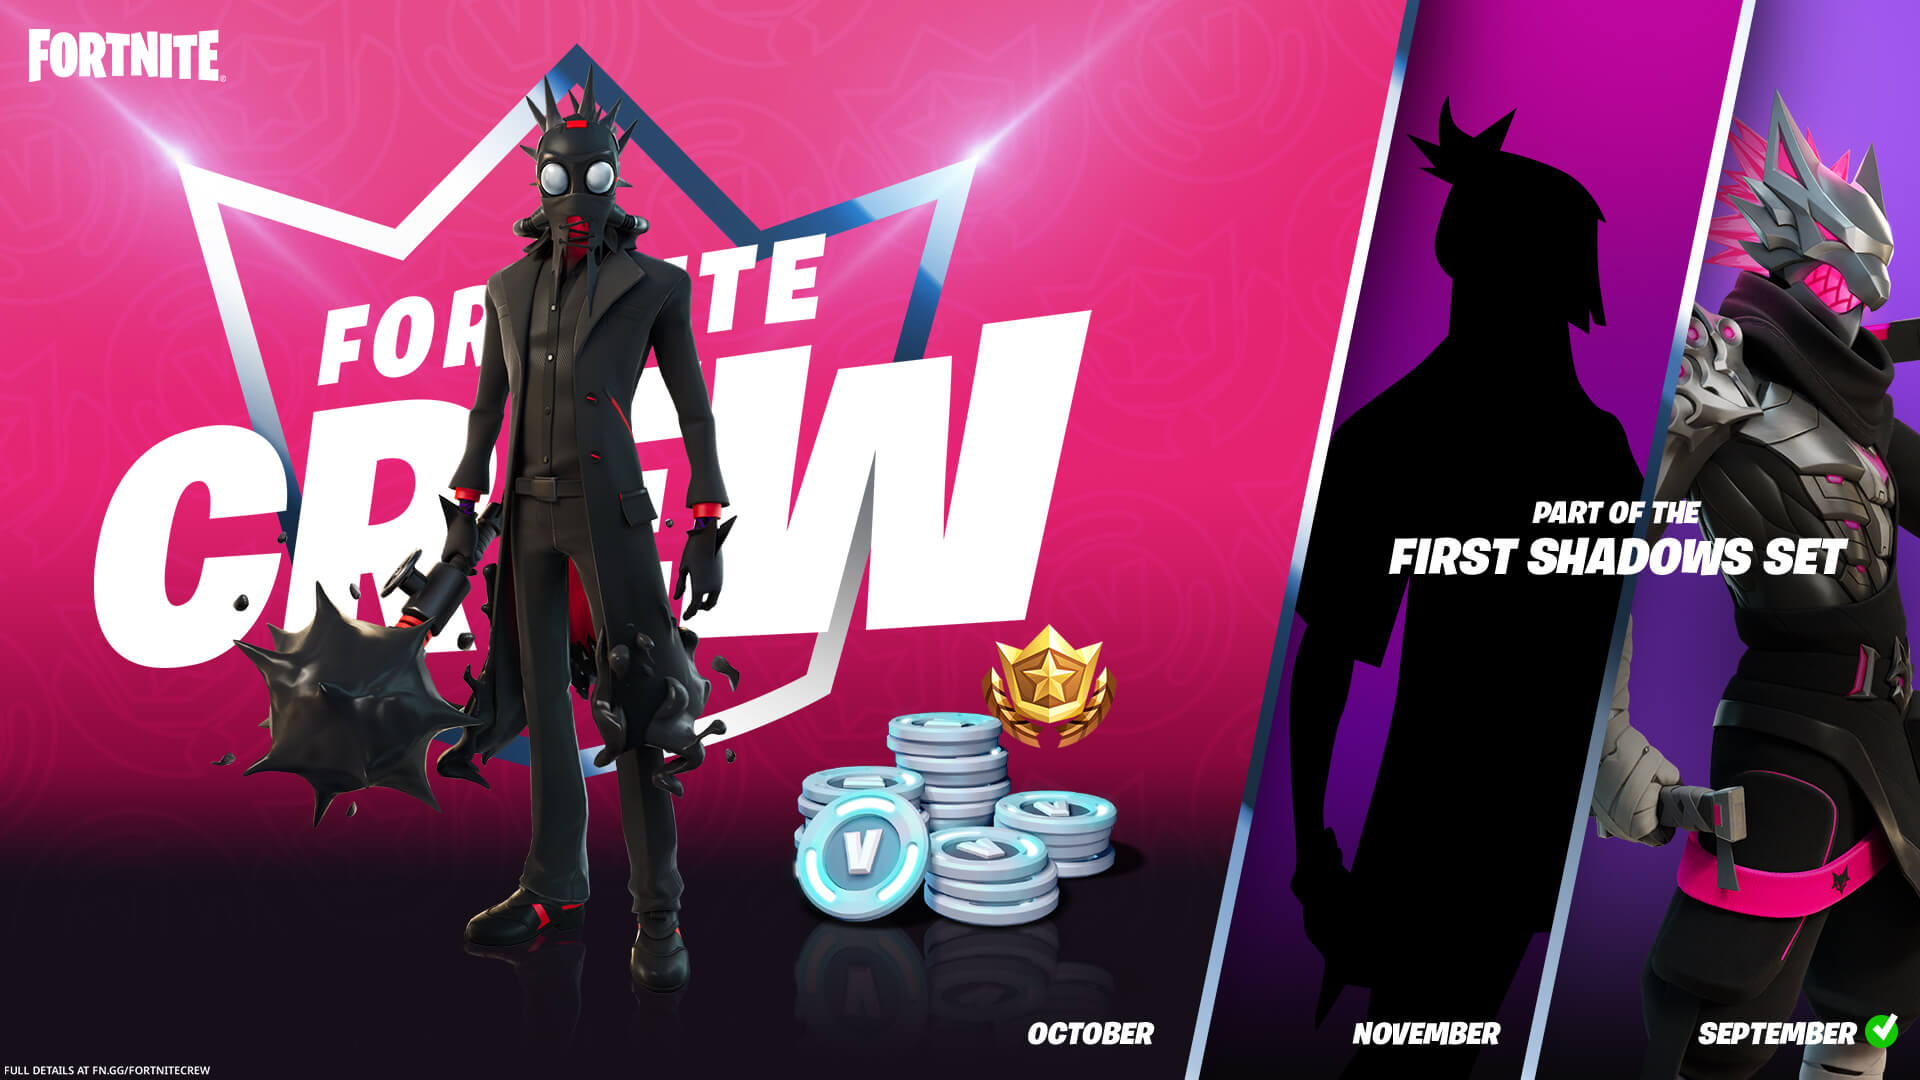 Fortnite Crew October - Chaos Origins outfit 